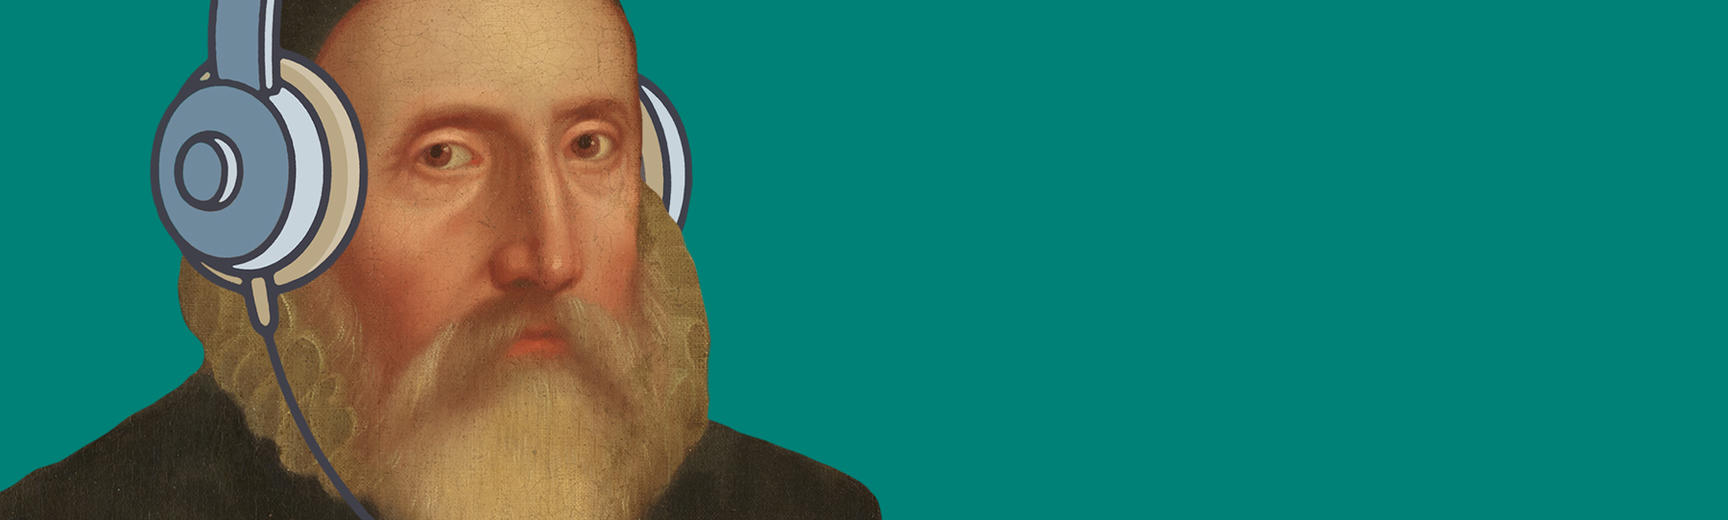 Portrait of a bearded man, illustrated with a pair of headphones